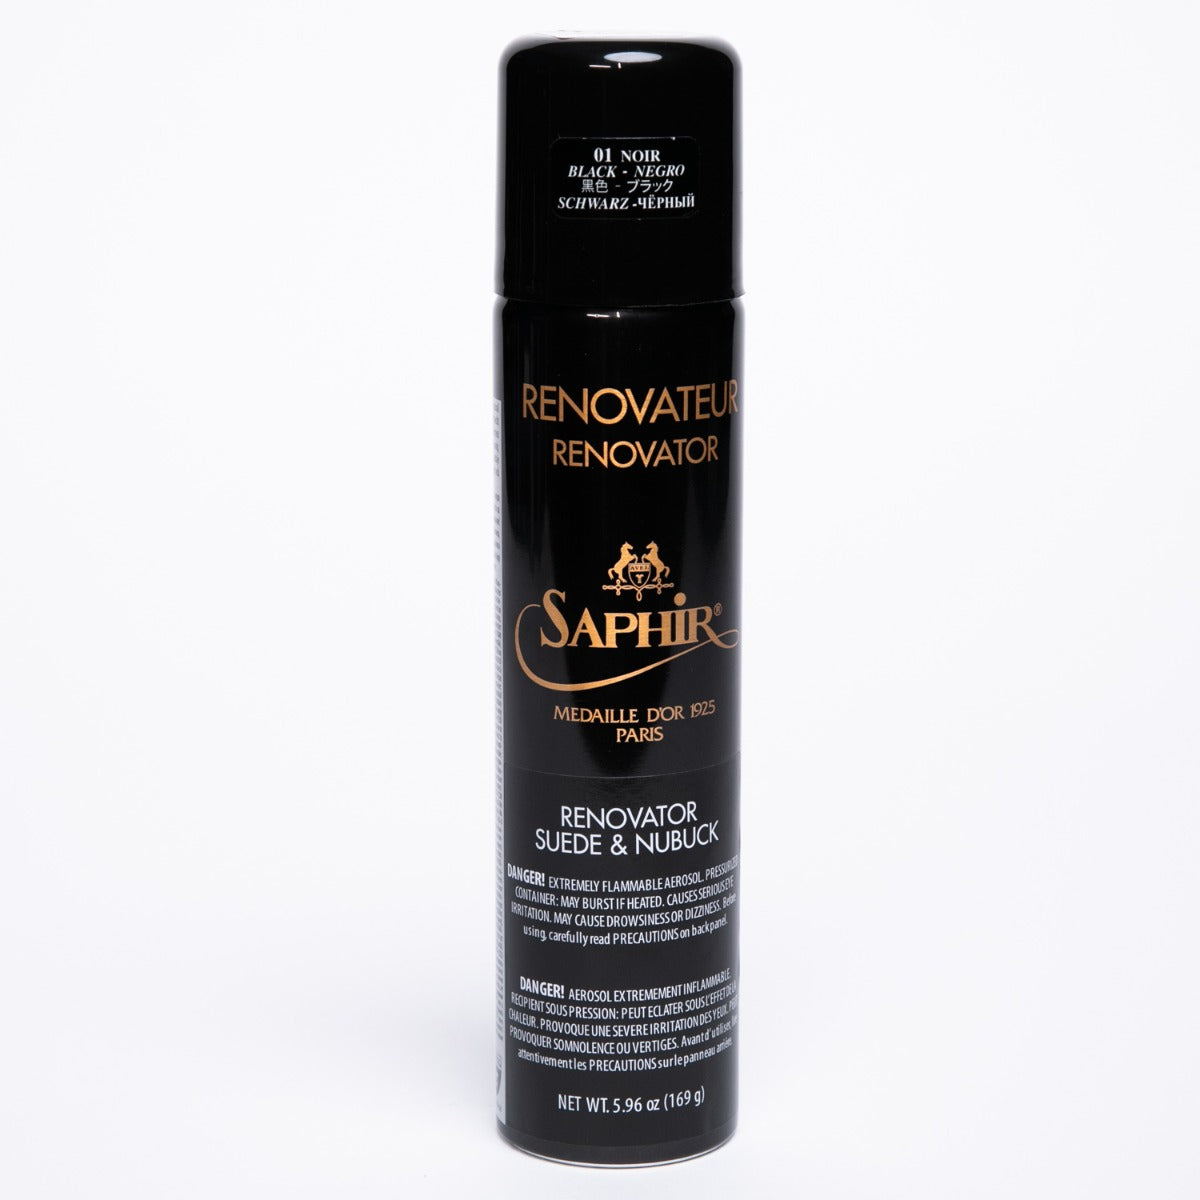 A Saphir Renovateur Suede & Nubuck Conditioning Spray bottle with a black cap and almond oil on a white background, from KirbyAllison.com.